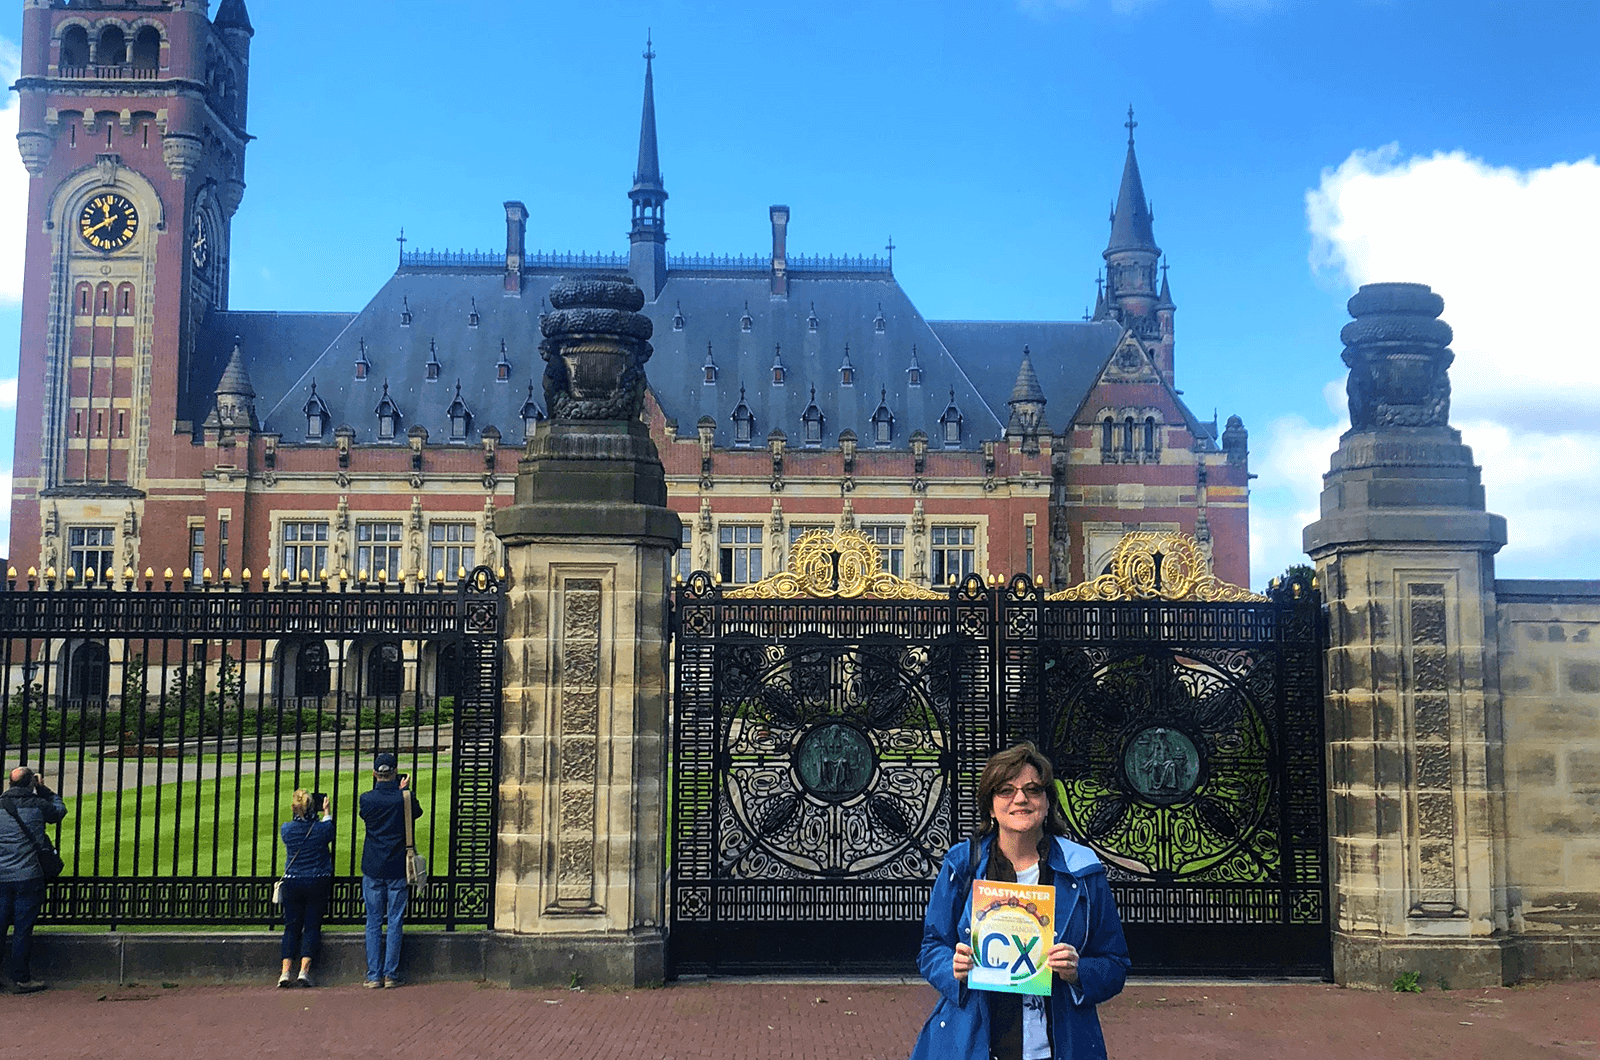 Andrea Patton of Houston, Texas, poses in front of the Peace Palace in The Hague, Netherlands. The Palace officially opened in 1913 and still houses the Permanent Court of Arbitration and the International Court of Justice. 